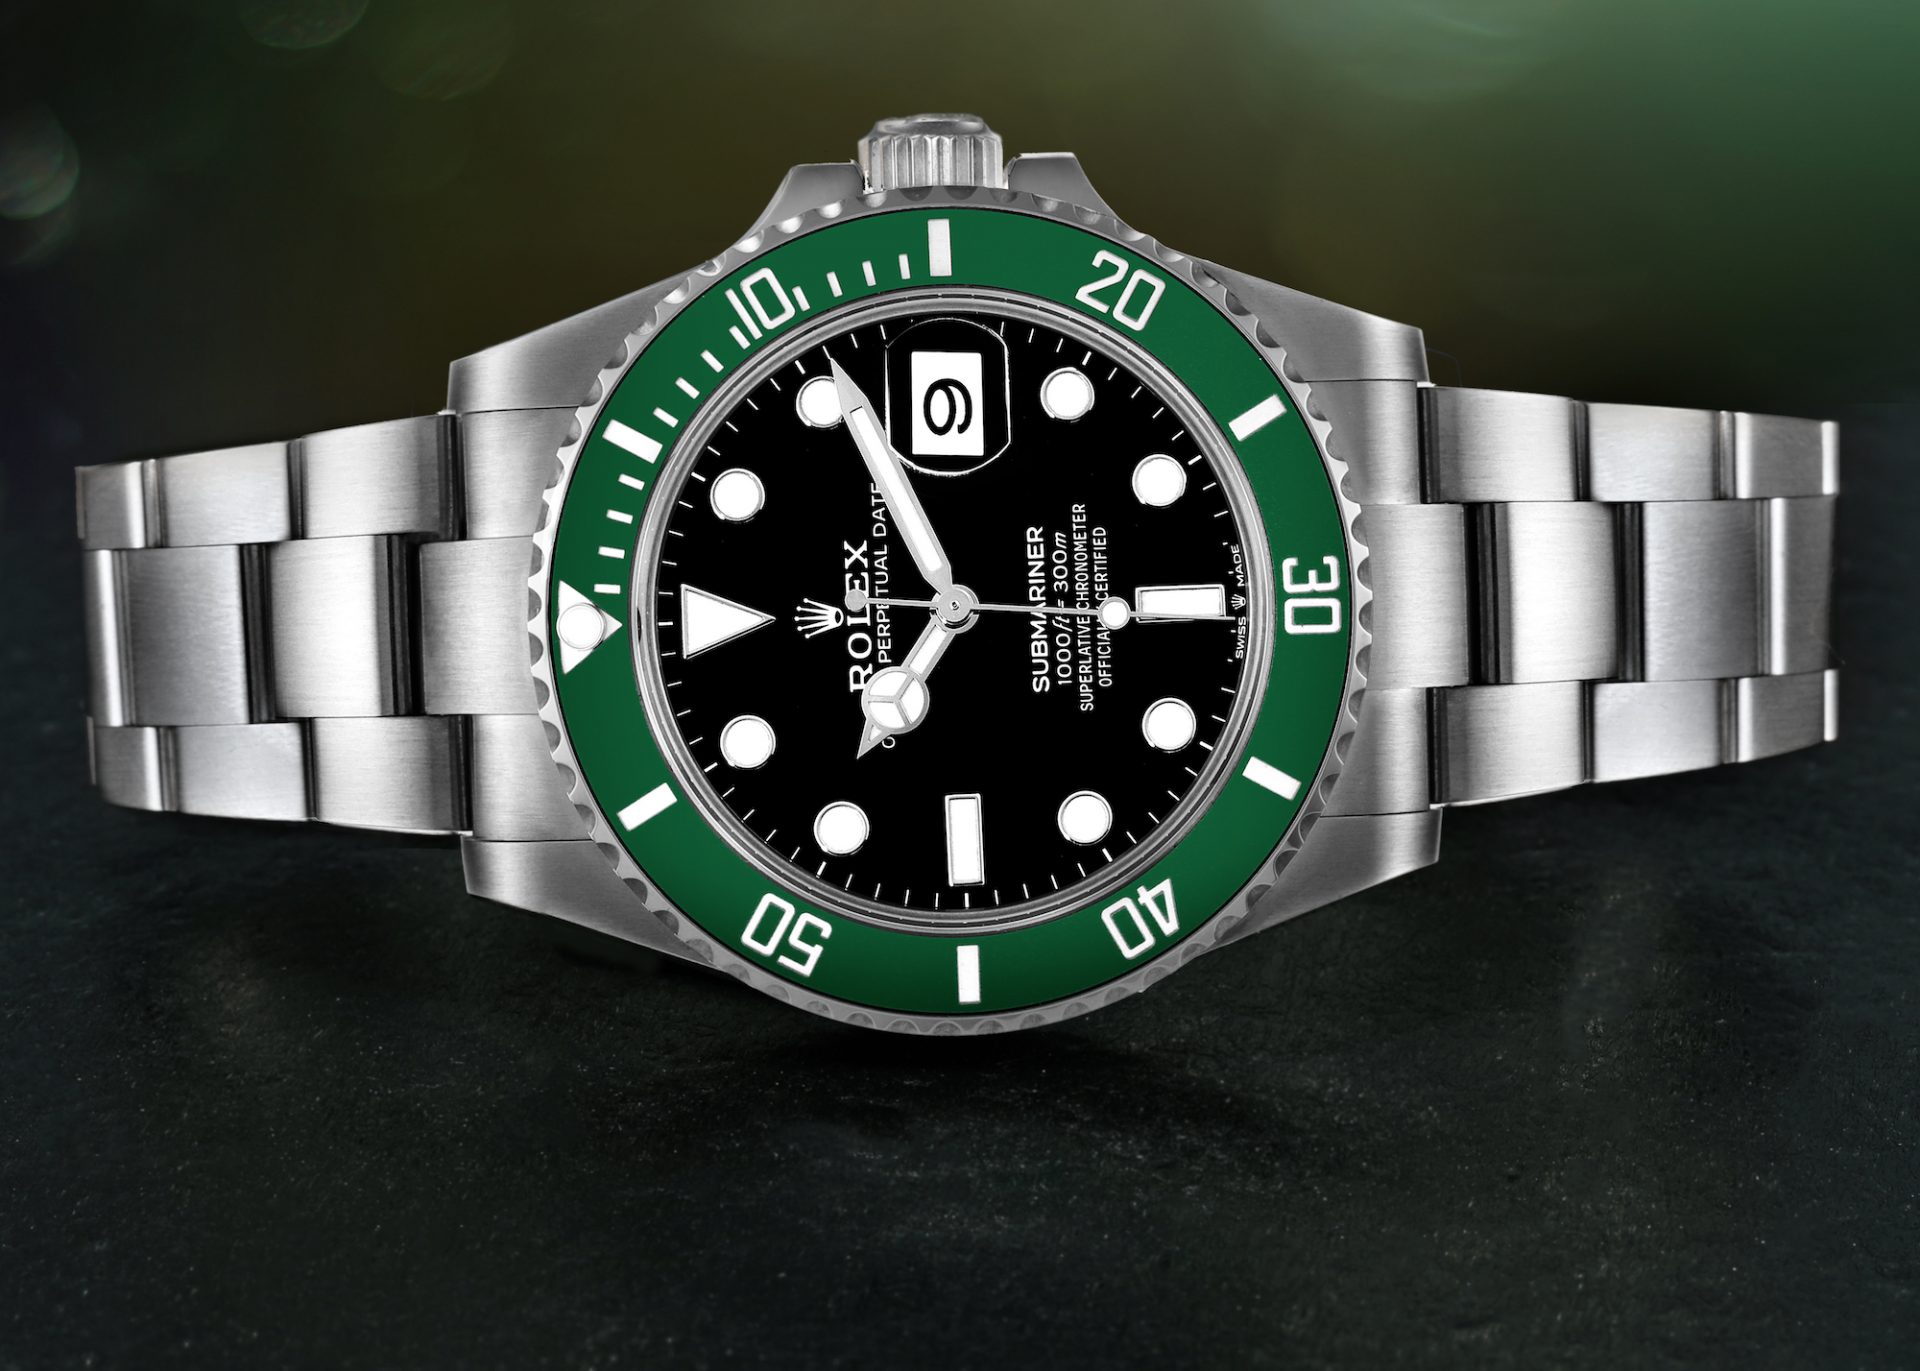 Guide to the Rolex Hulk: Submariner 116610LV